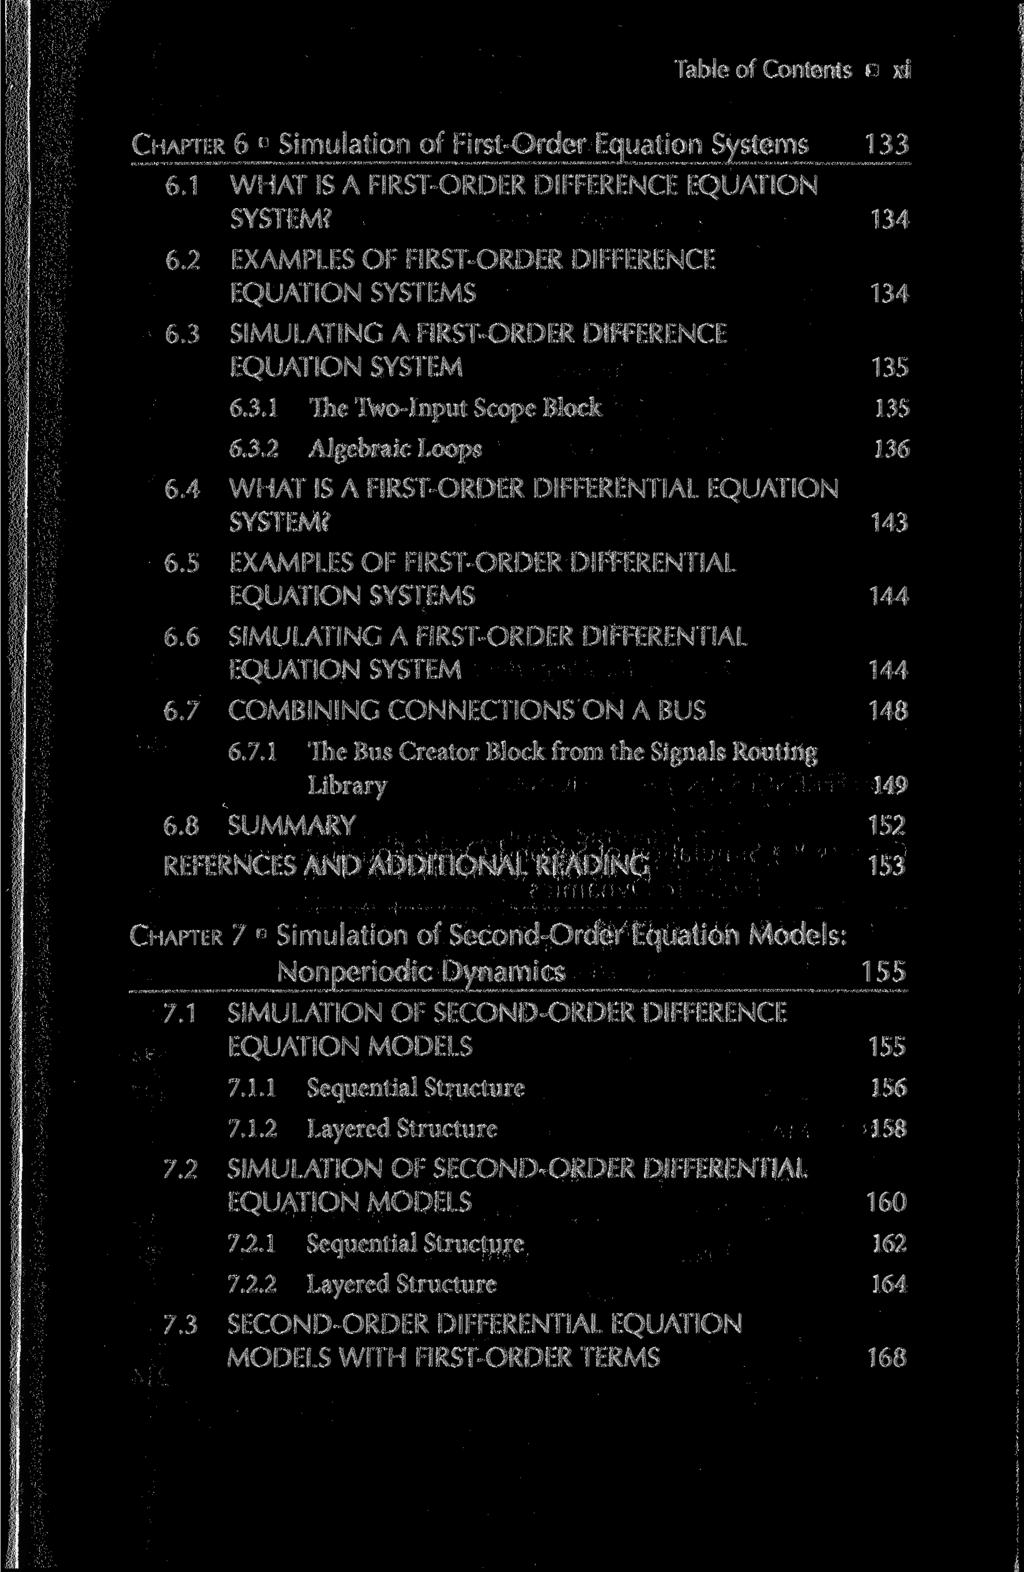 Table of Contents xi CHAPTER 6 Simulation of First-Order Equation Systems 133 6.1 WHAT IS A FIRST-ORDER DIFFERENCE EQUATION SYSTEM? 134 6.2 EXAMPLES OF FIRST-ORDER DIFFERENCE EQUATION SYSTEMS 134 6.